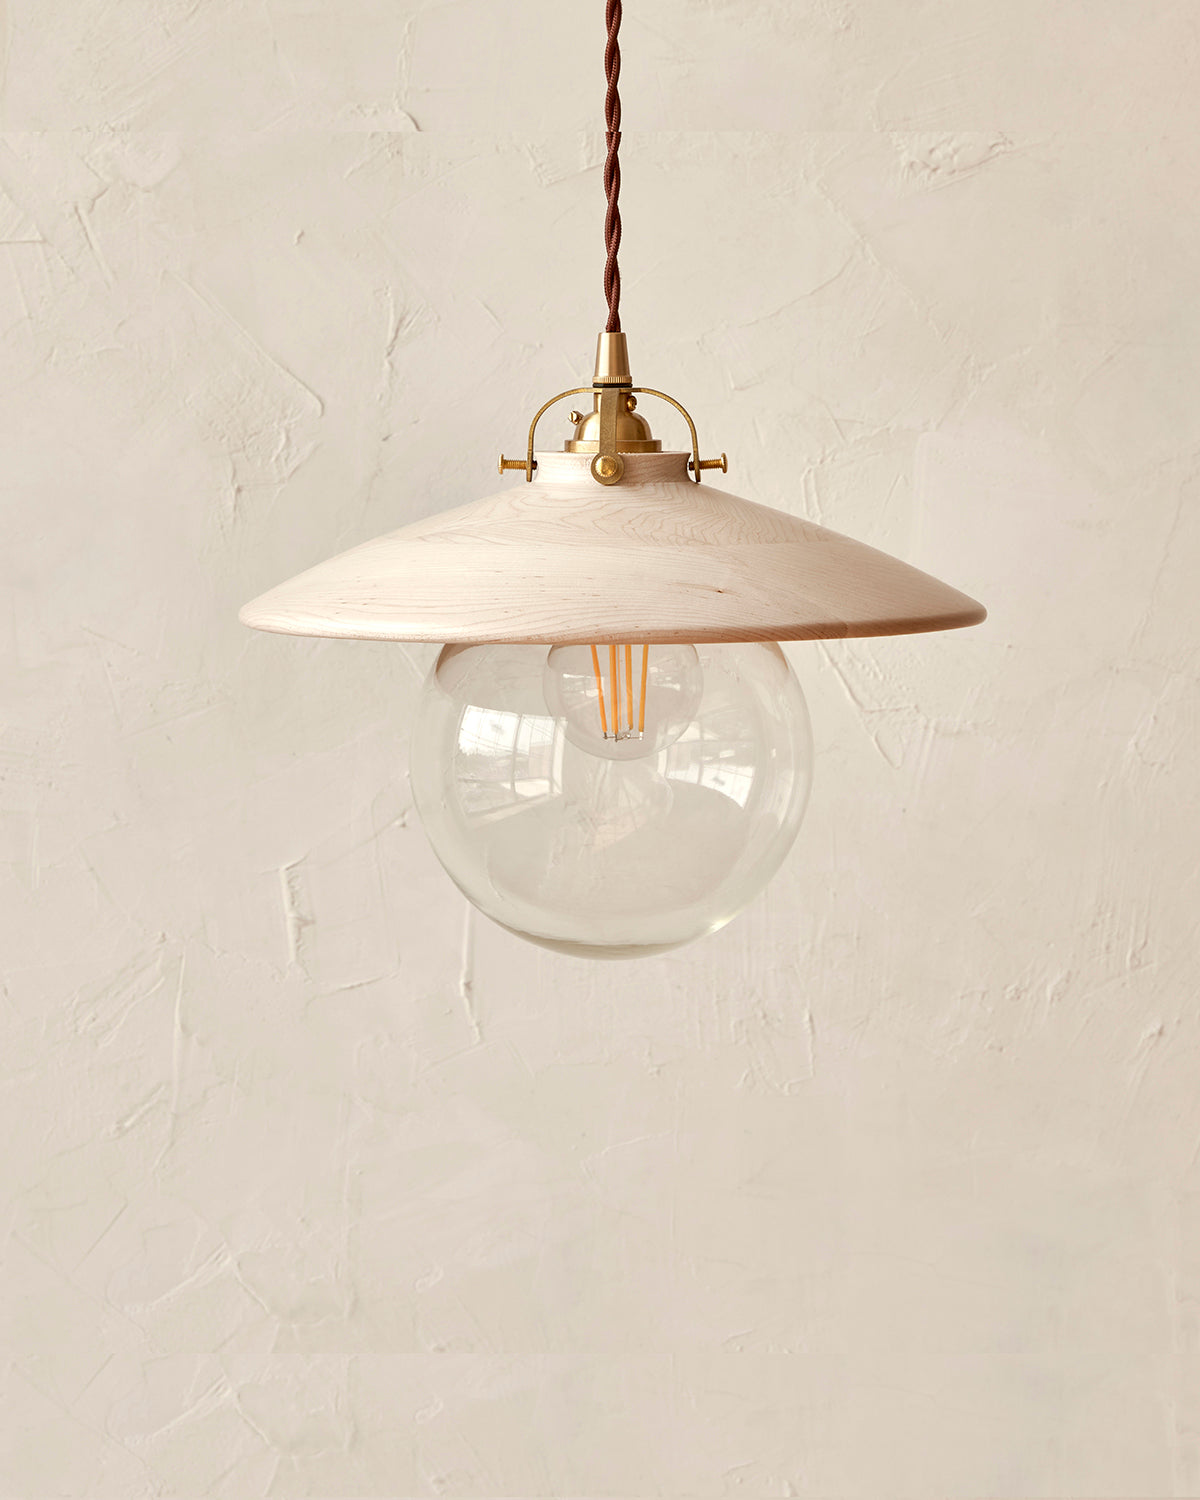 Pendant light with large clear glass globe and decorative wooden clear maple shade. Hardwired or plug light fixture. Made by Lostine in Philadelphia. Simple interior design, made in the USA. Warm American Modern Design